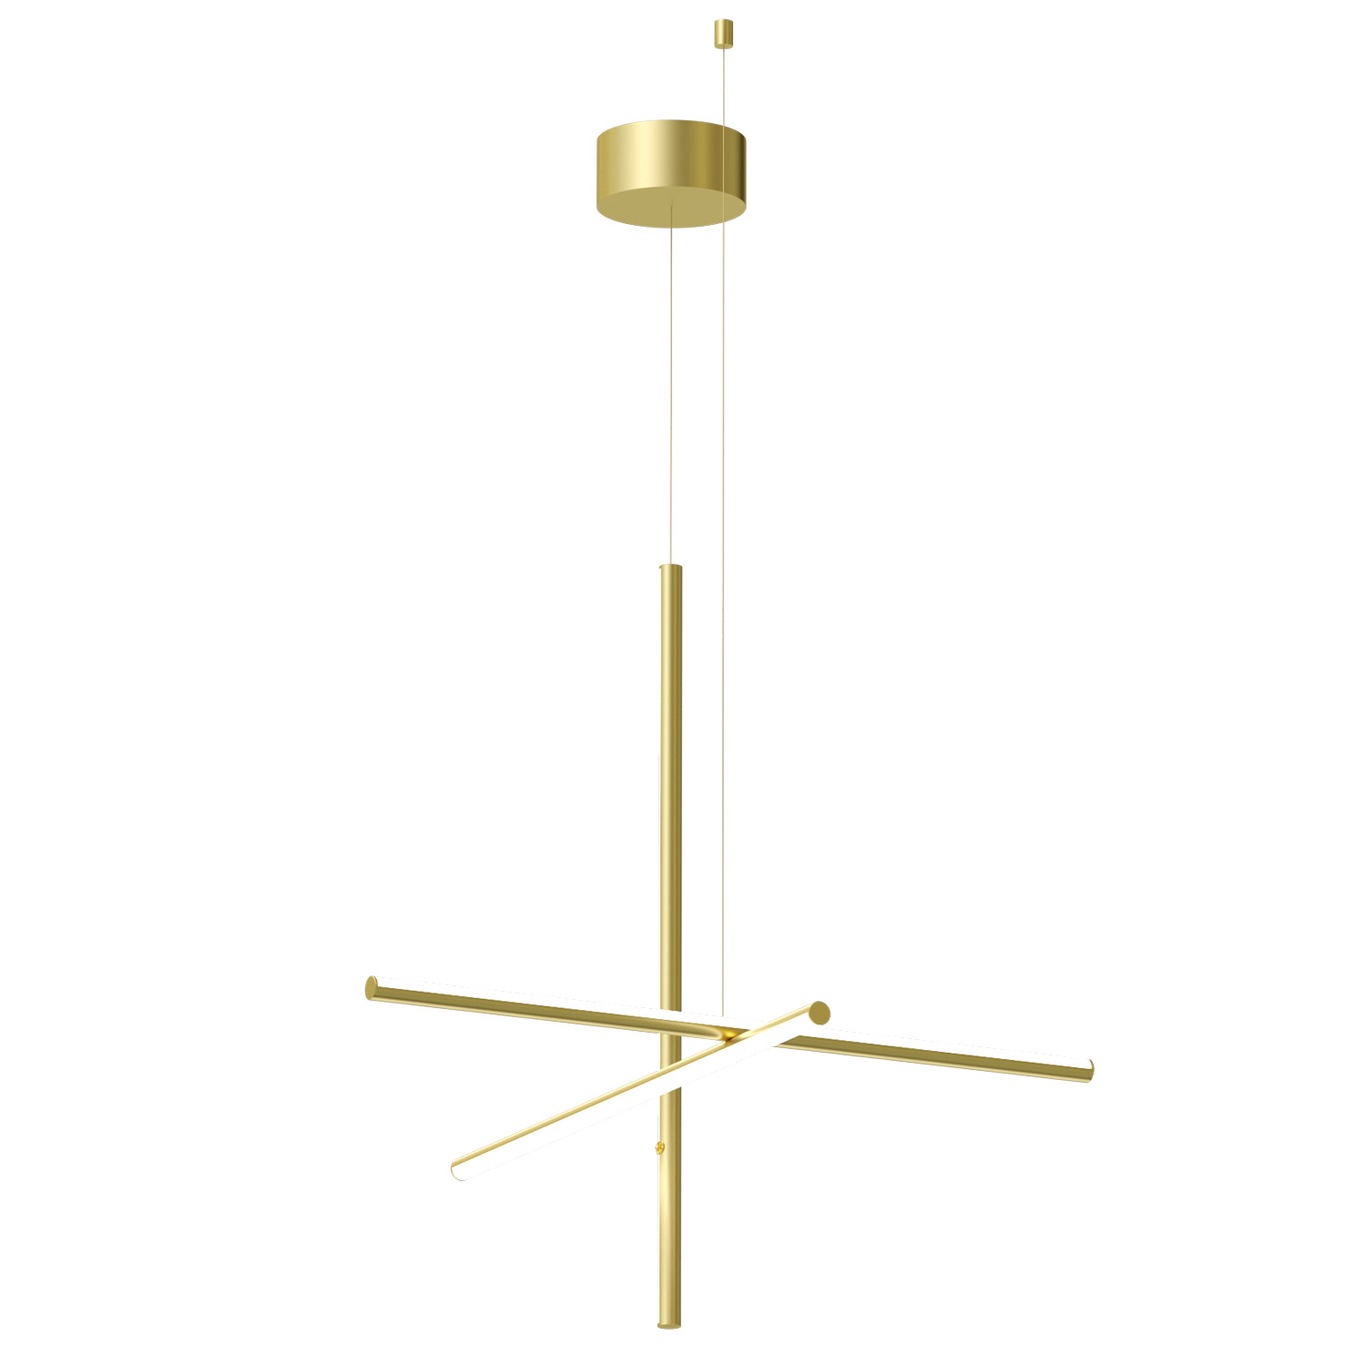 Coordinates S1 Hanglamp, Anodized Champagne